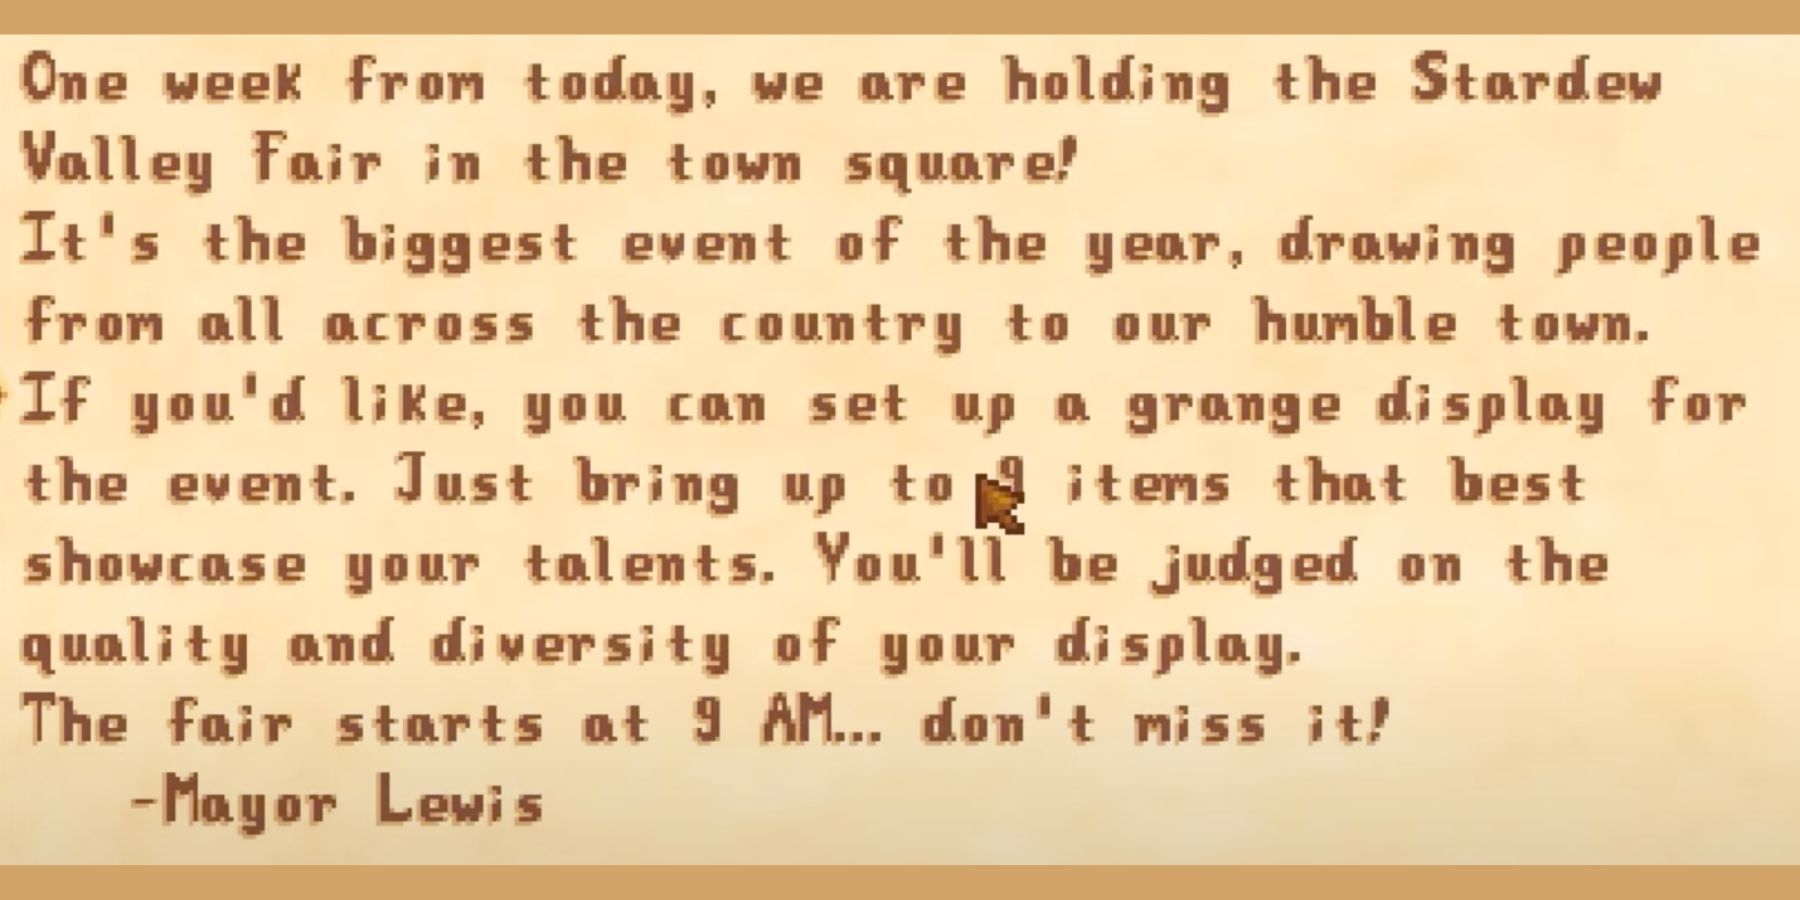 the invitation to the grange display contest in stardew valley.